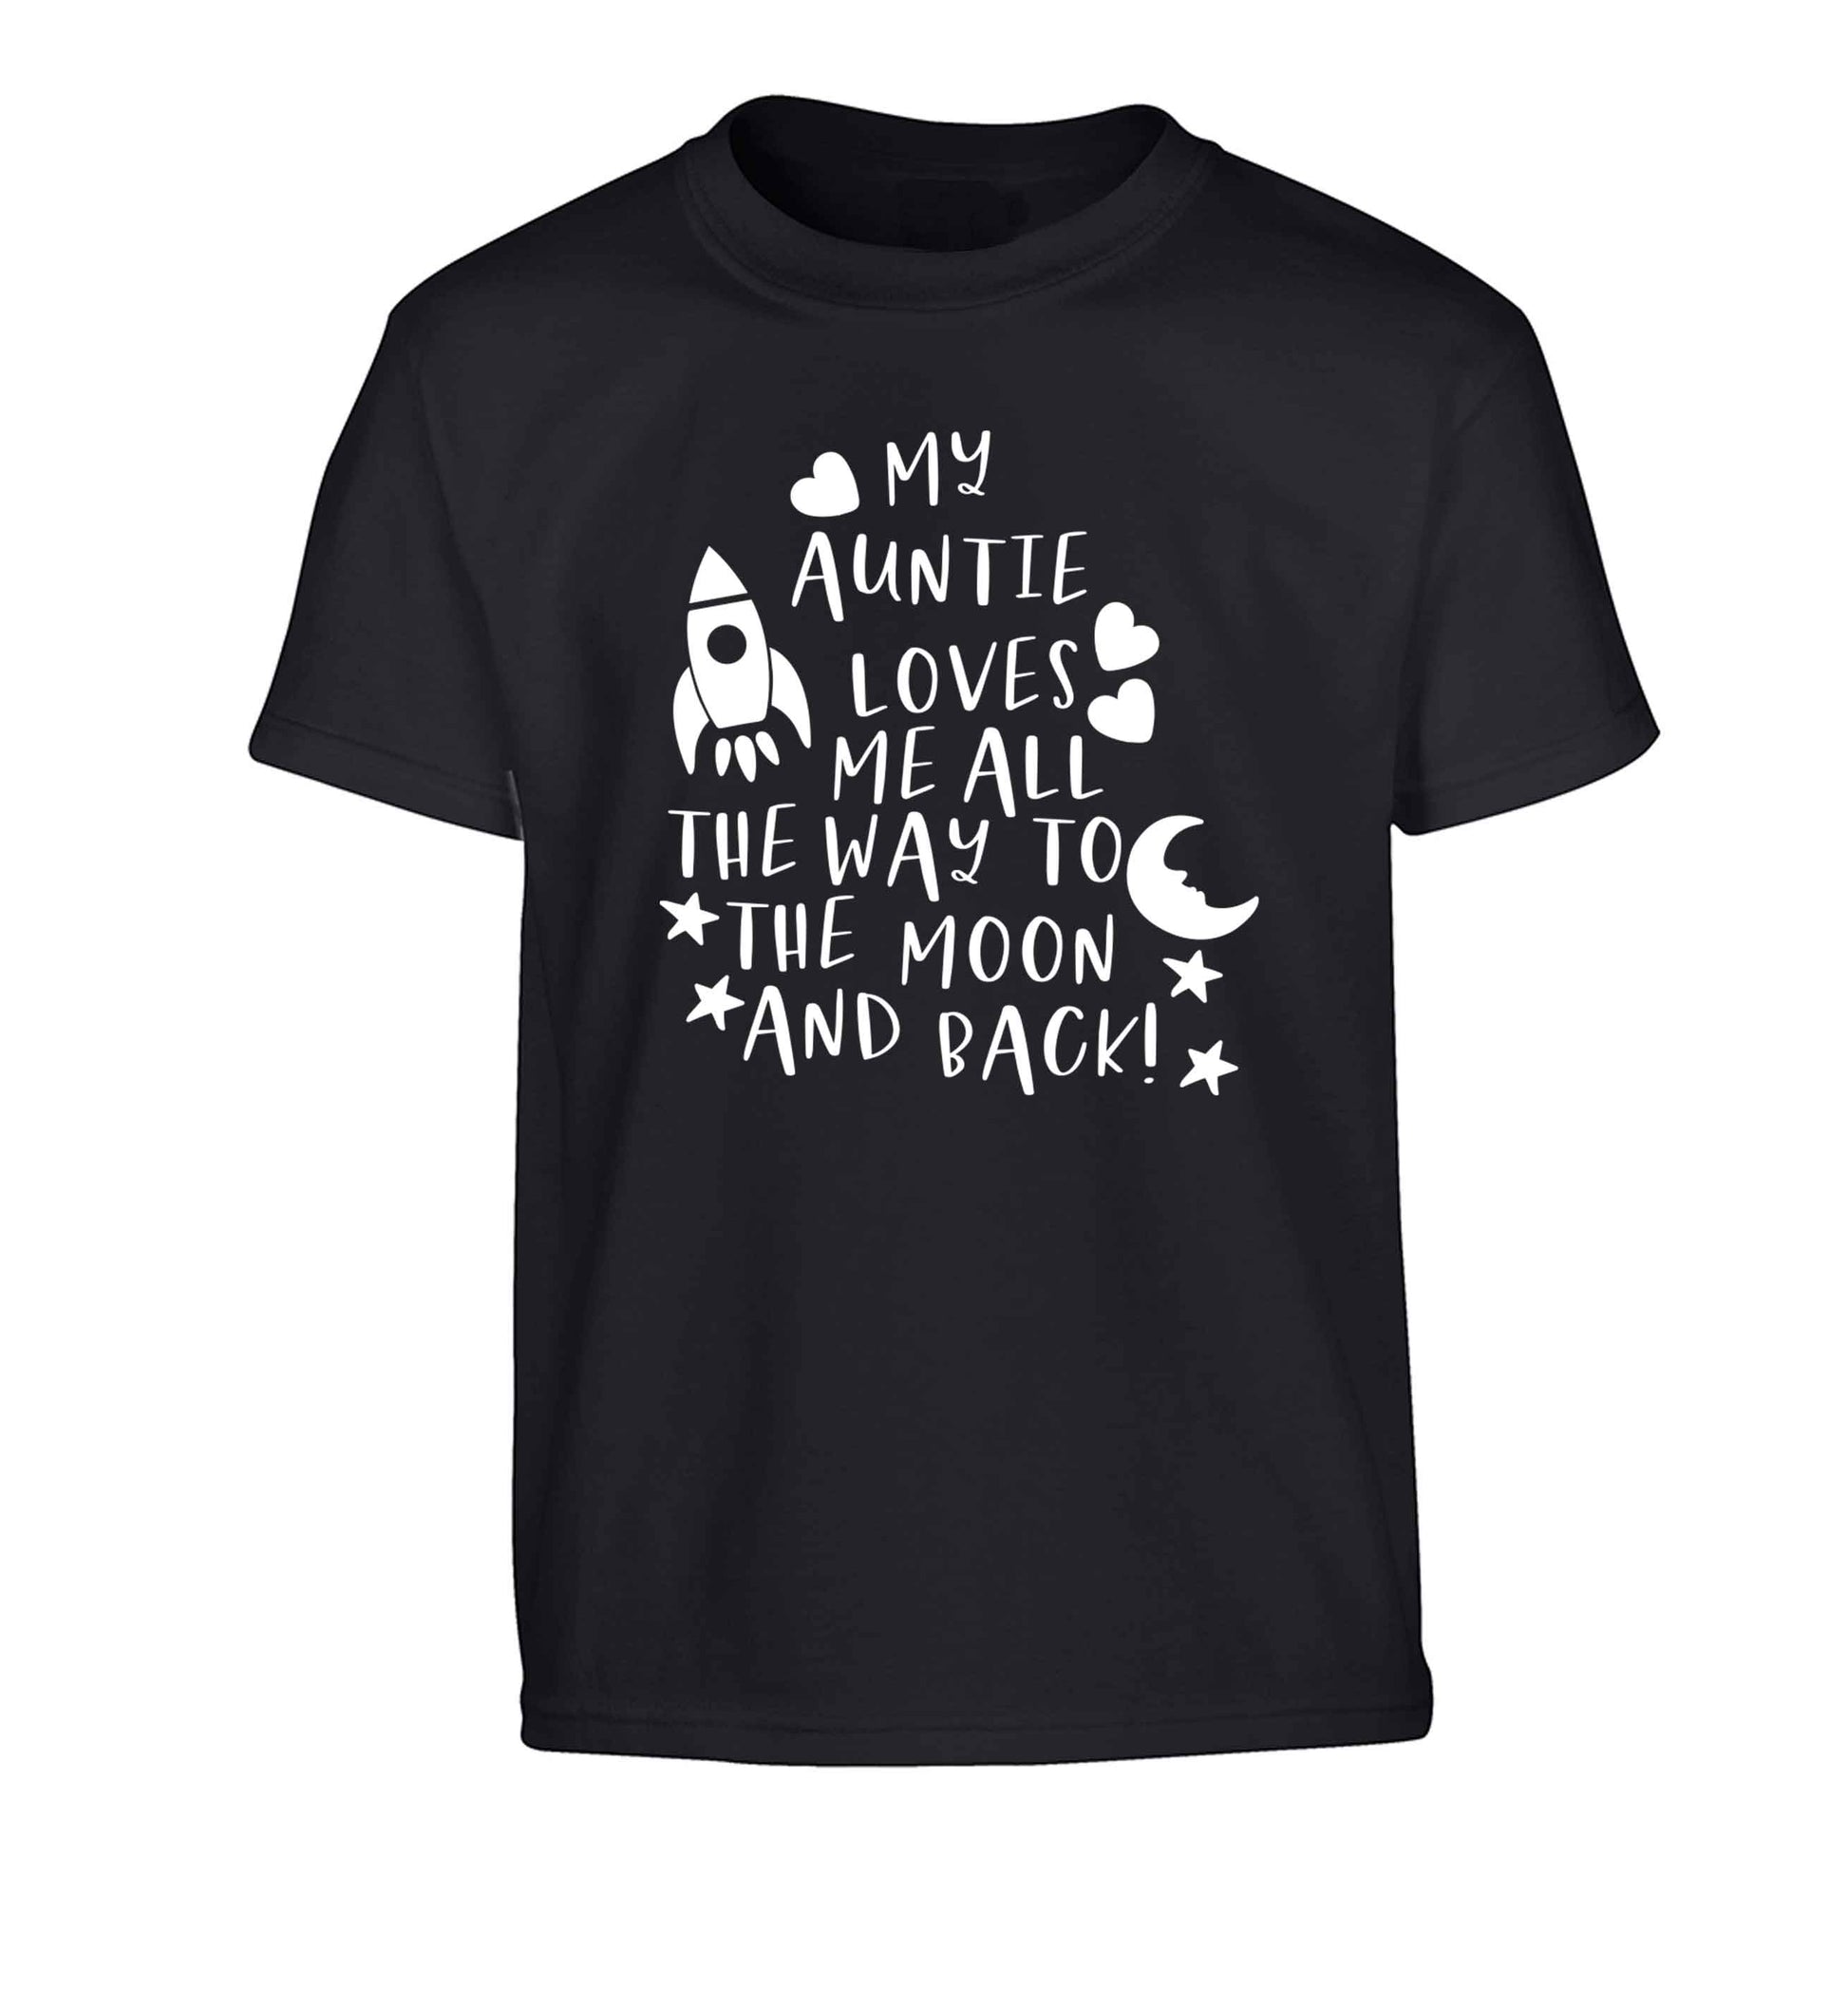 My auntie loves me all the way to the moon and back Children's black Tshirt 12-13 Years